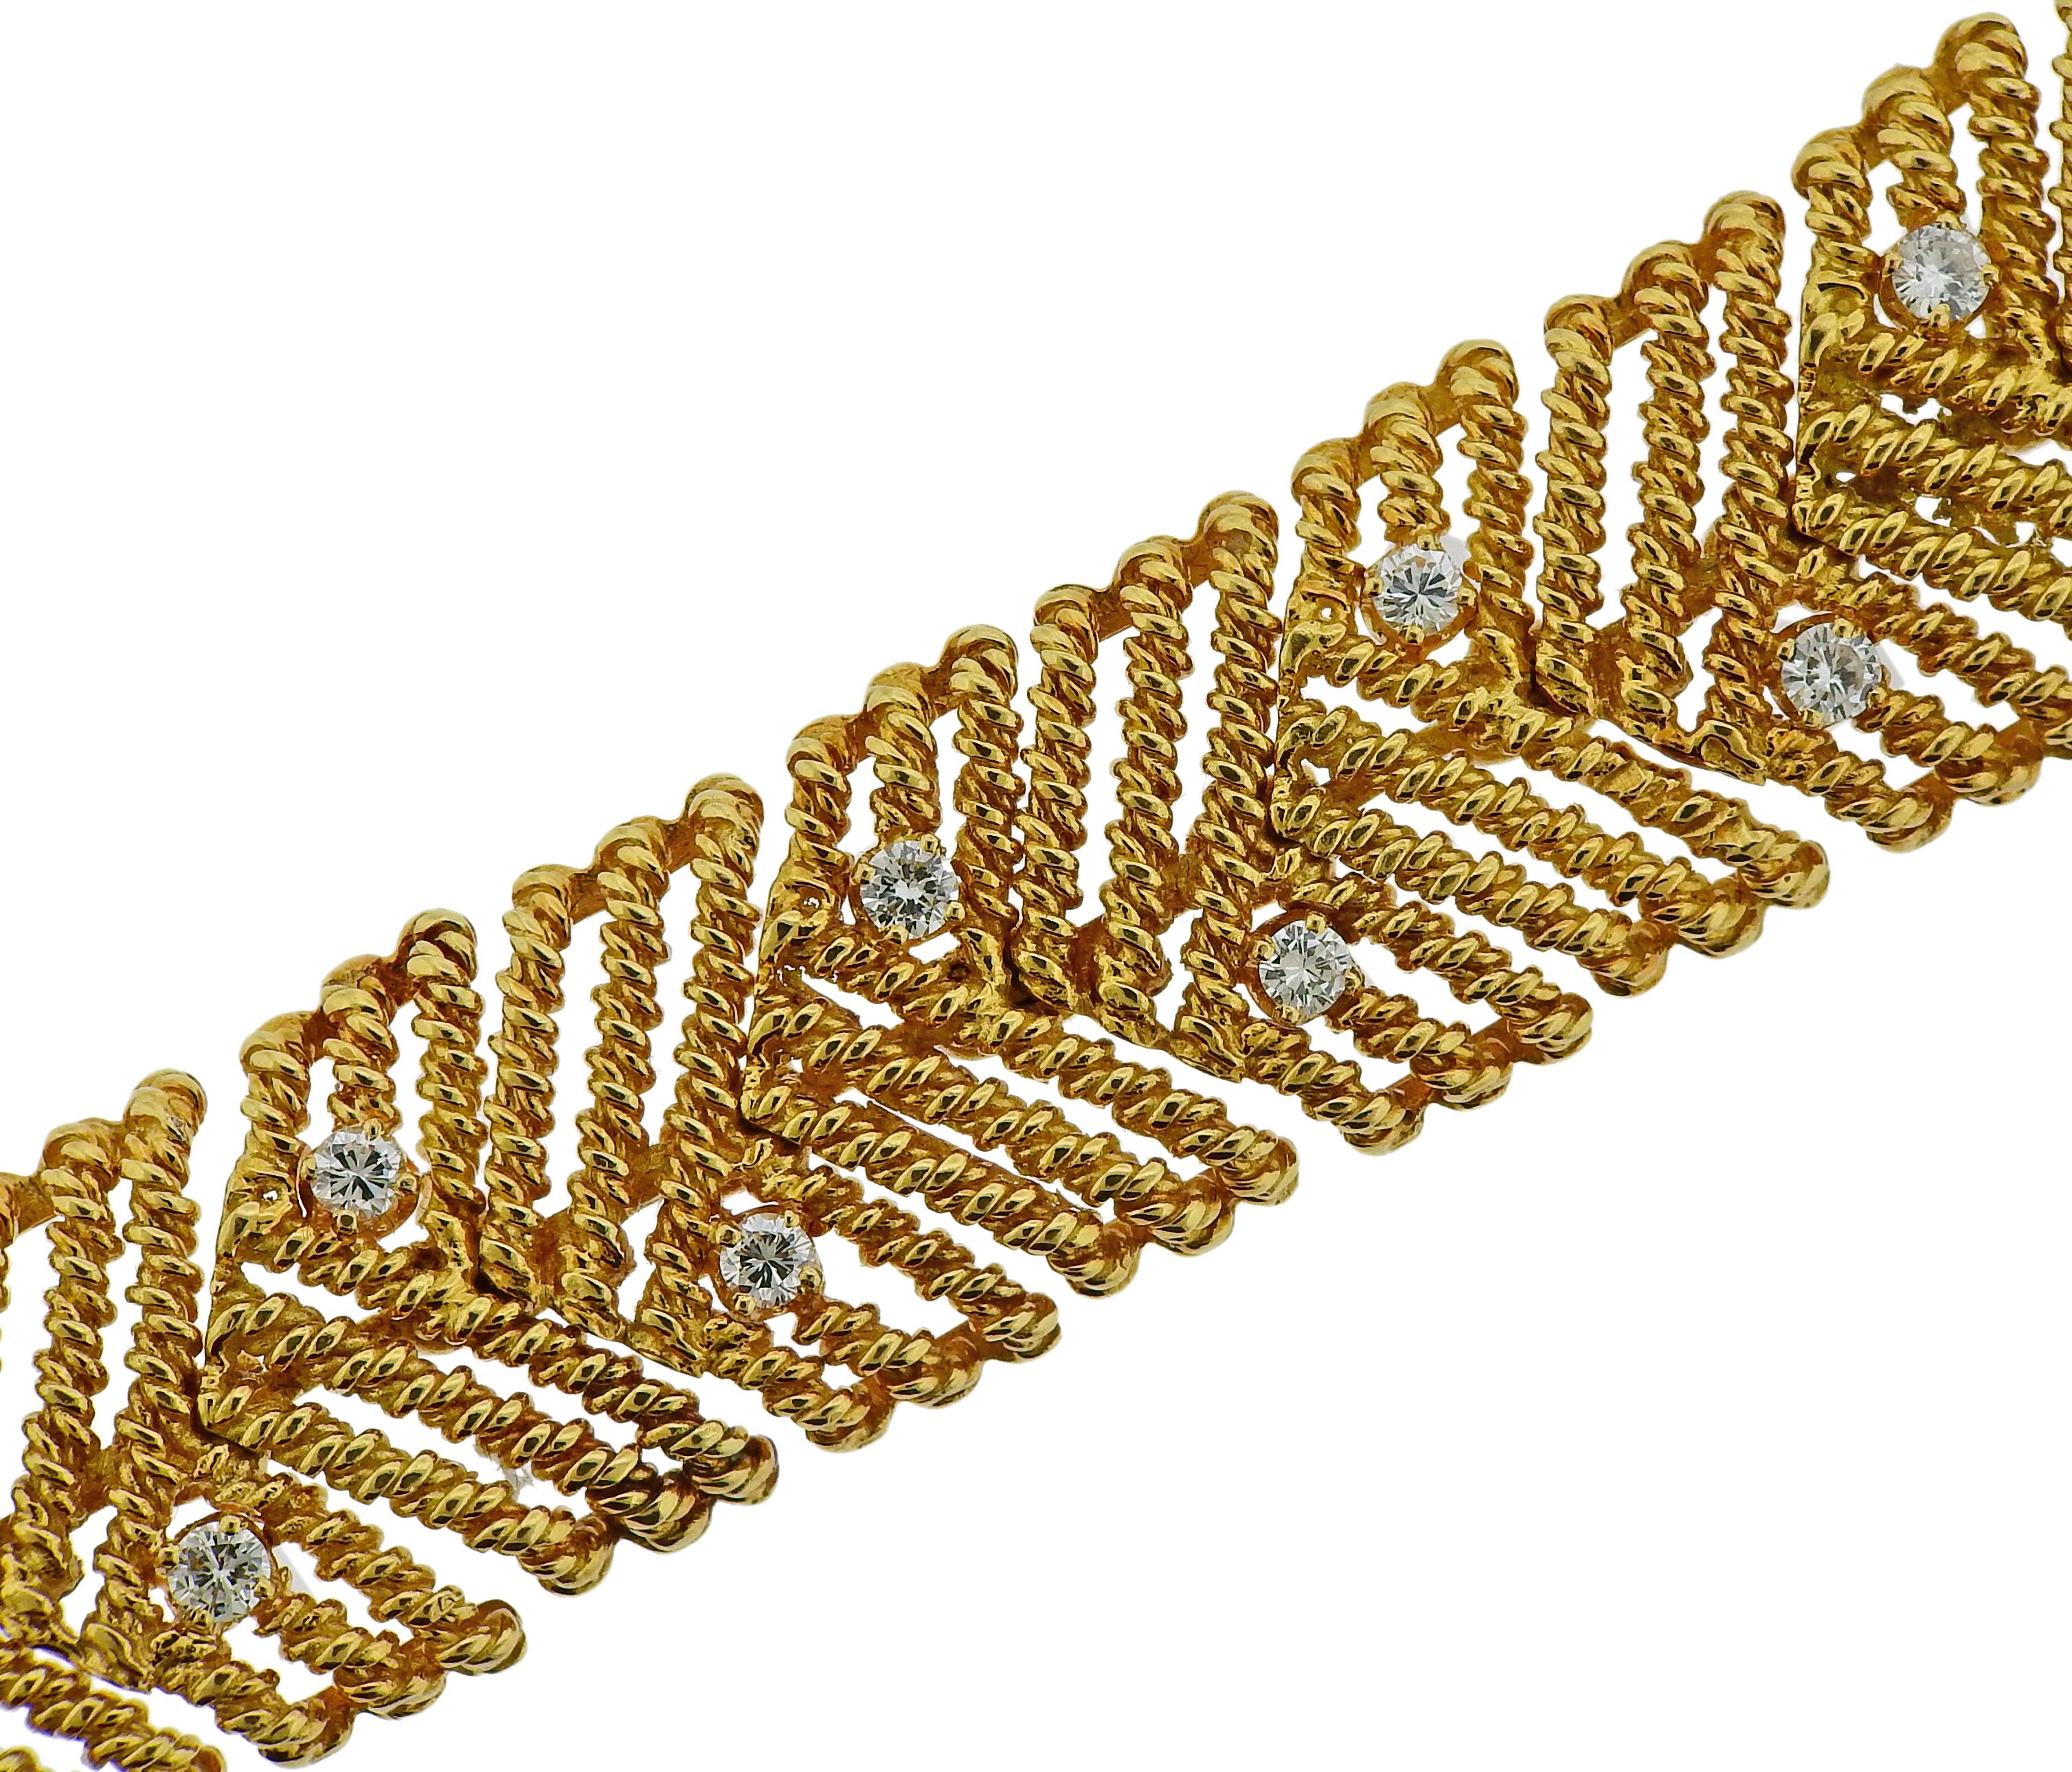 18k yellow gold woven bracelet by Tiffany & Co, adorned with approx. 1.80ctw in G/VS diamonds. Bracelet is 6.75